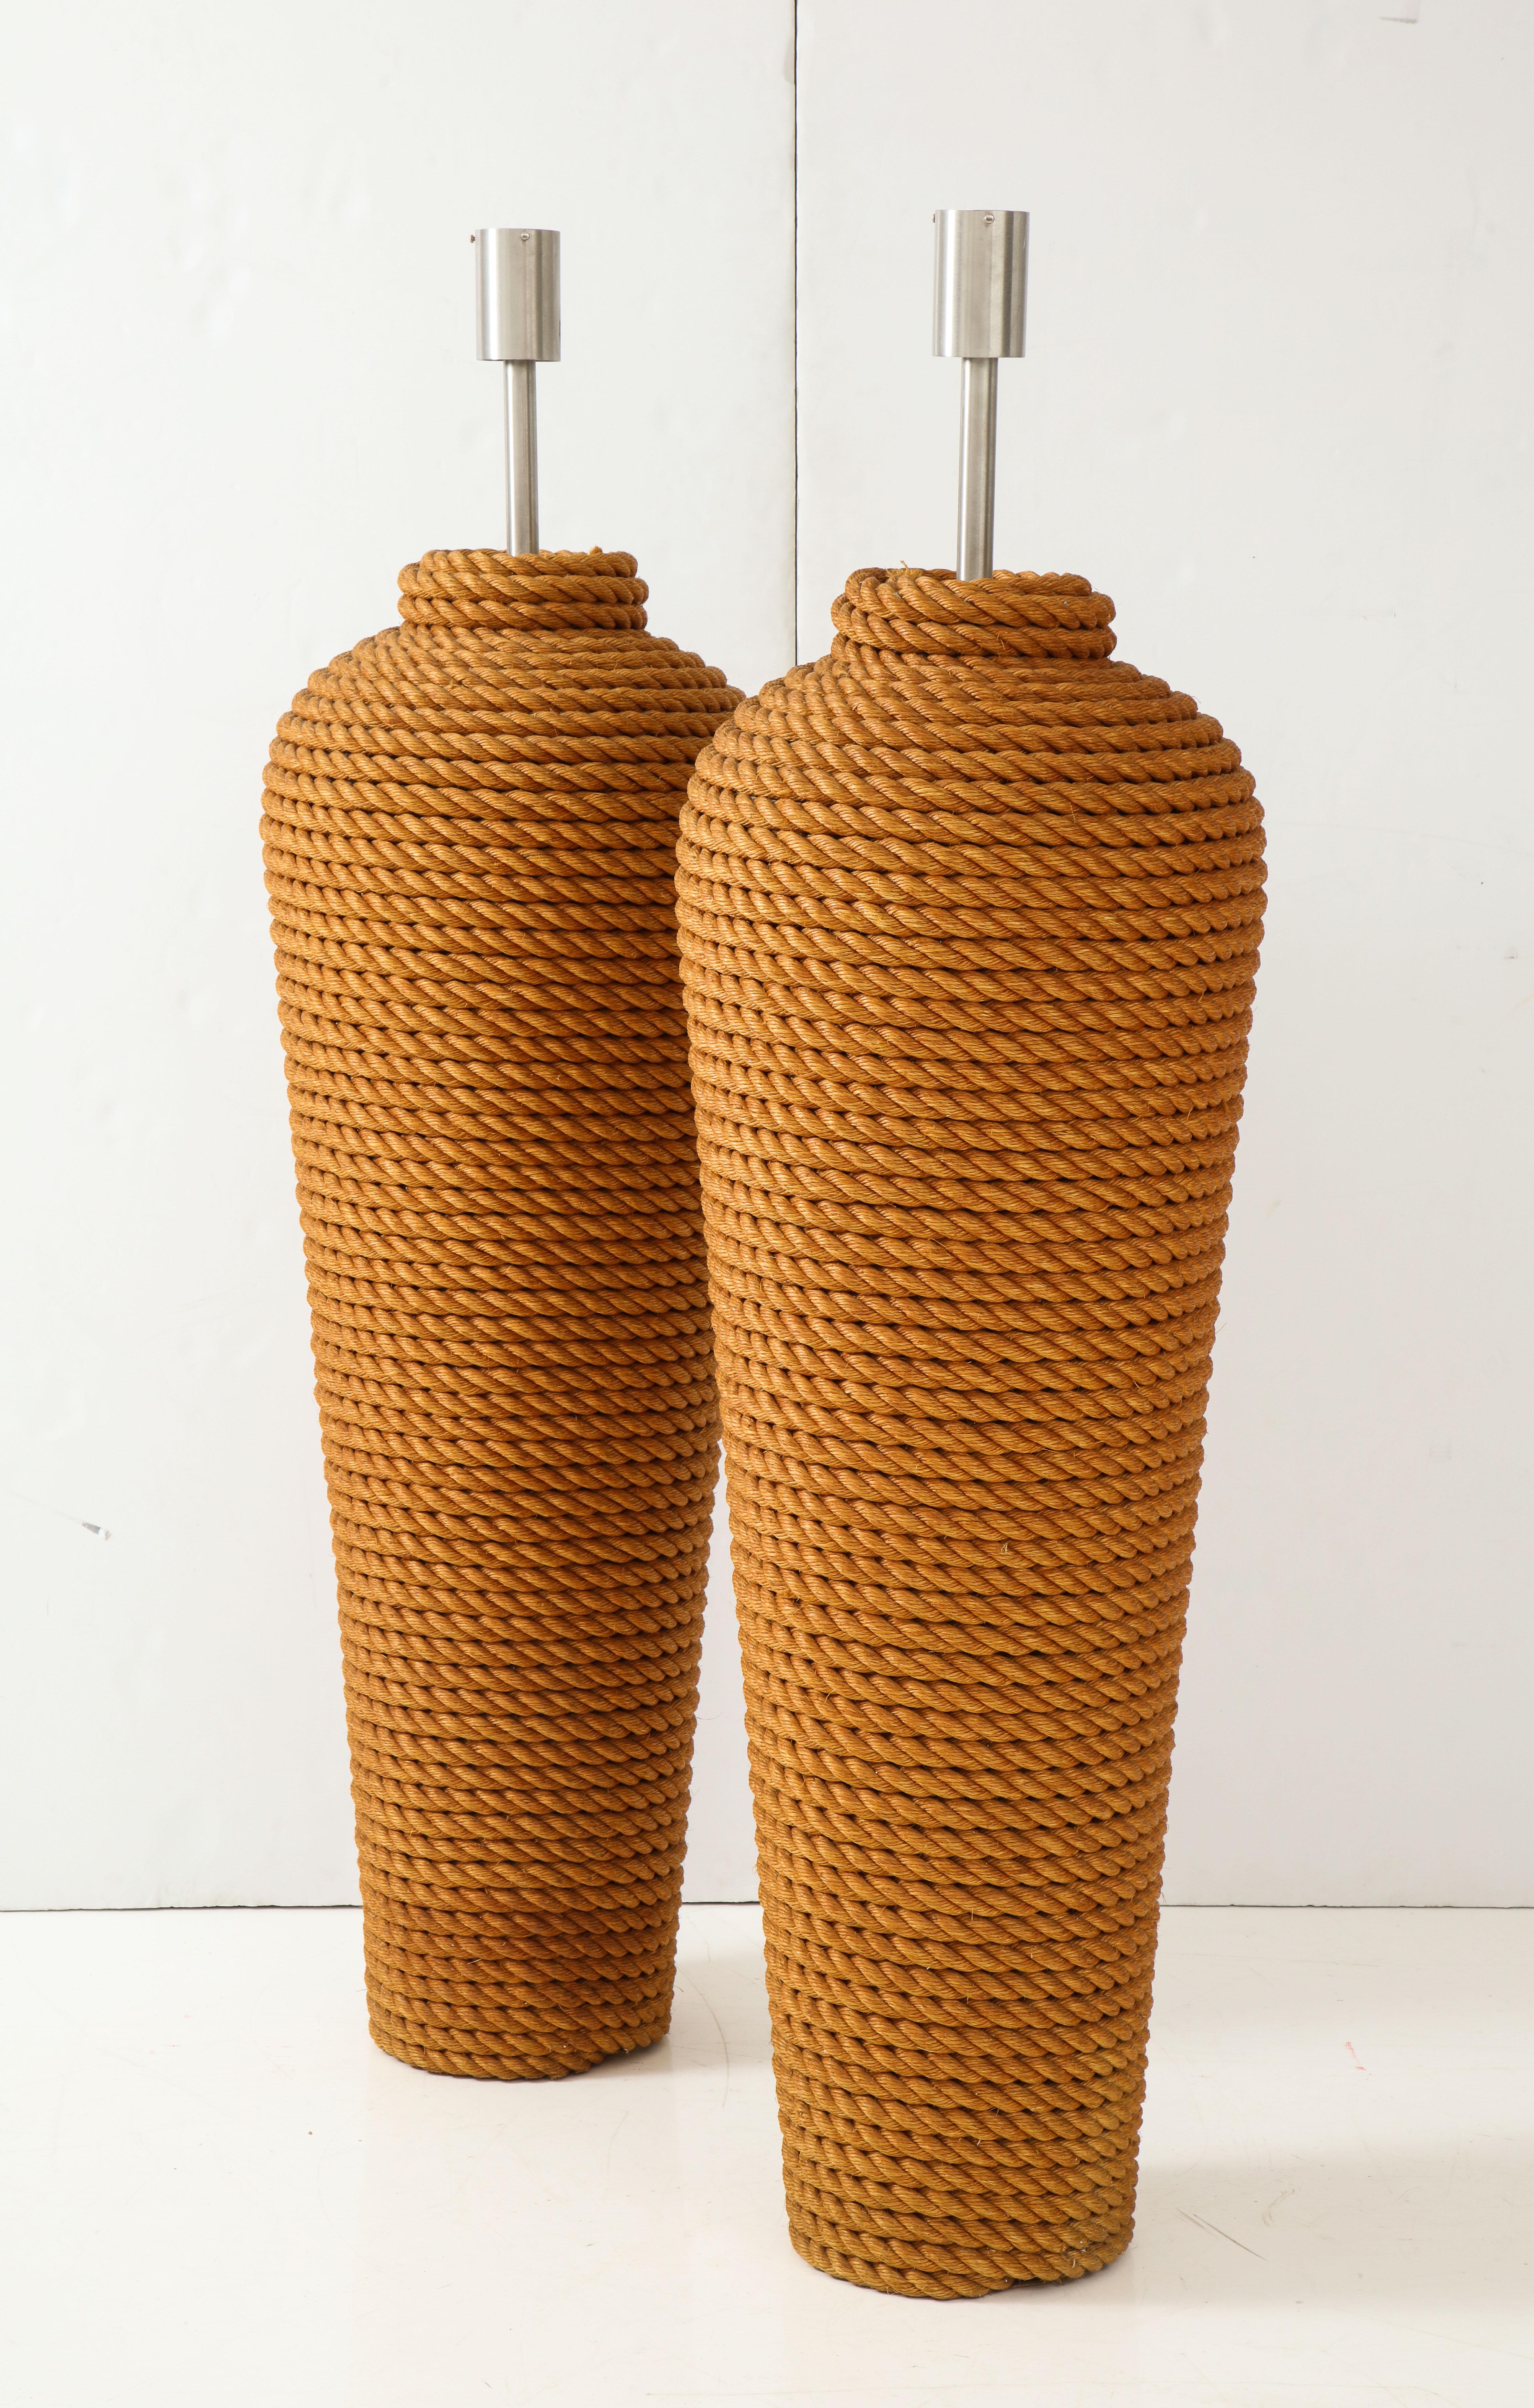 Pair of monumental 1960s French rope floor lamps.
The lamps are completely covered in heavy coiled bands of rope.
They have been newly rewired for the US with a floor dimmer switch.
These lamps are a statement piece.